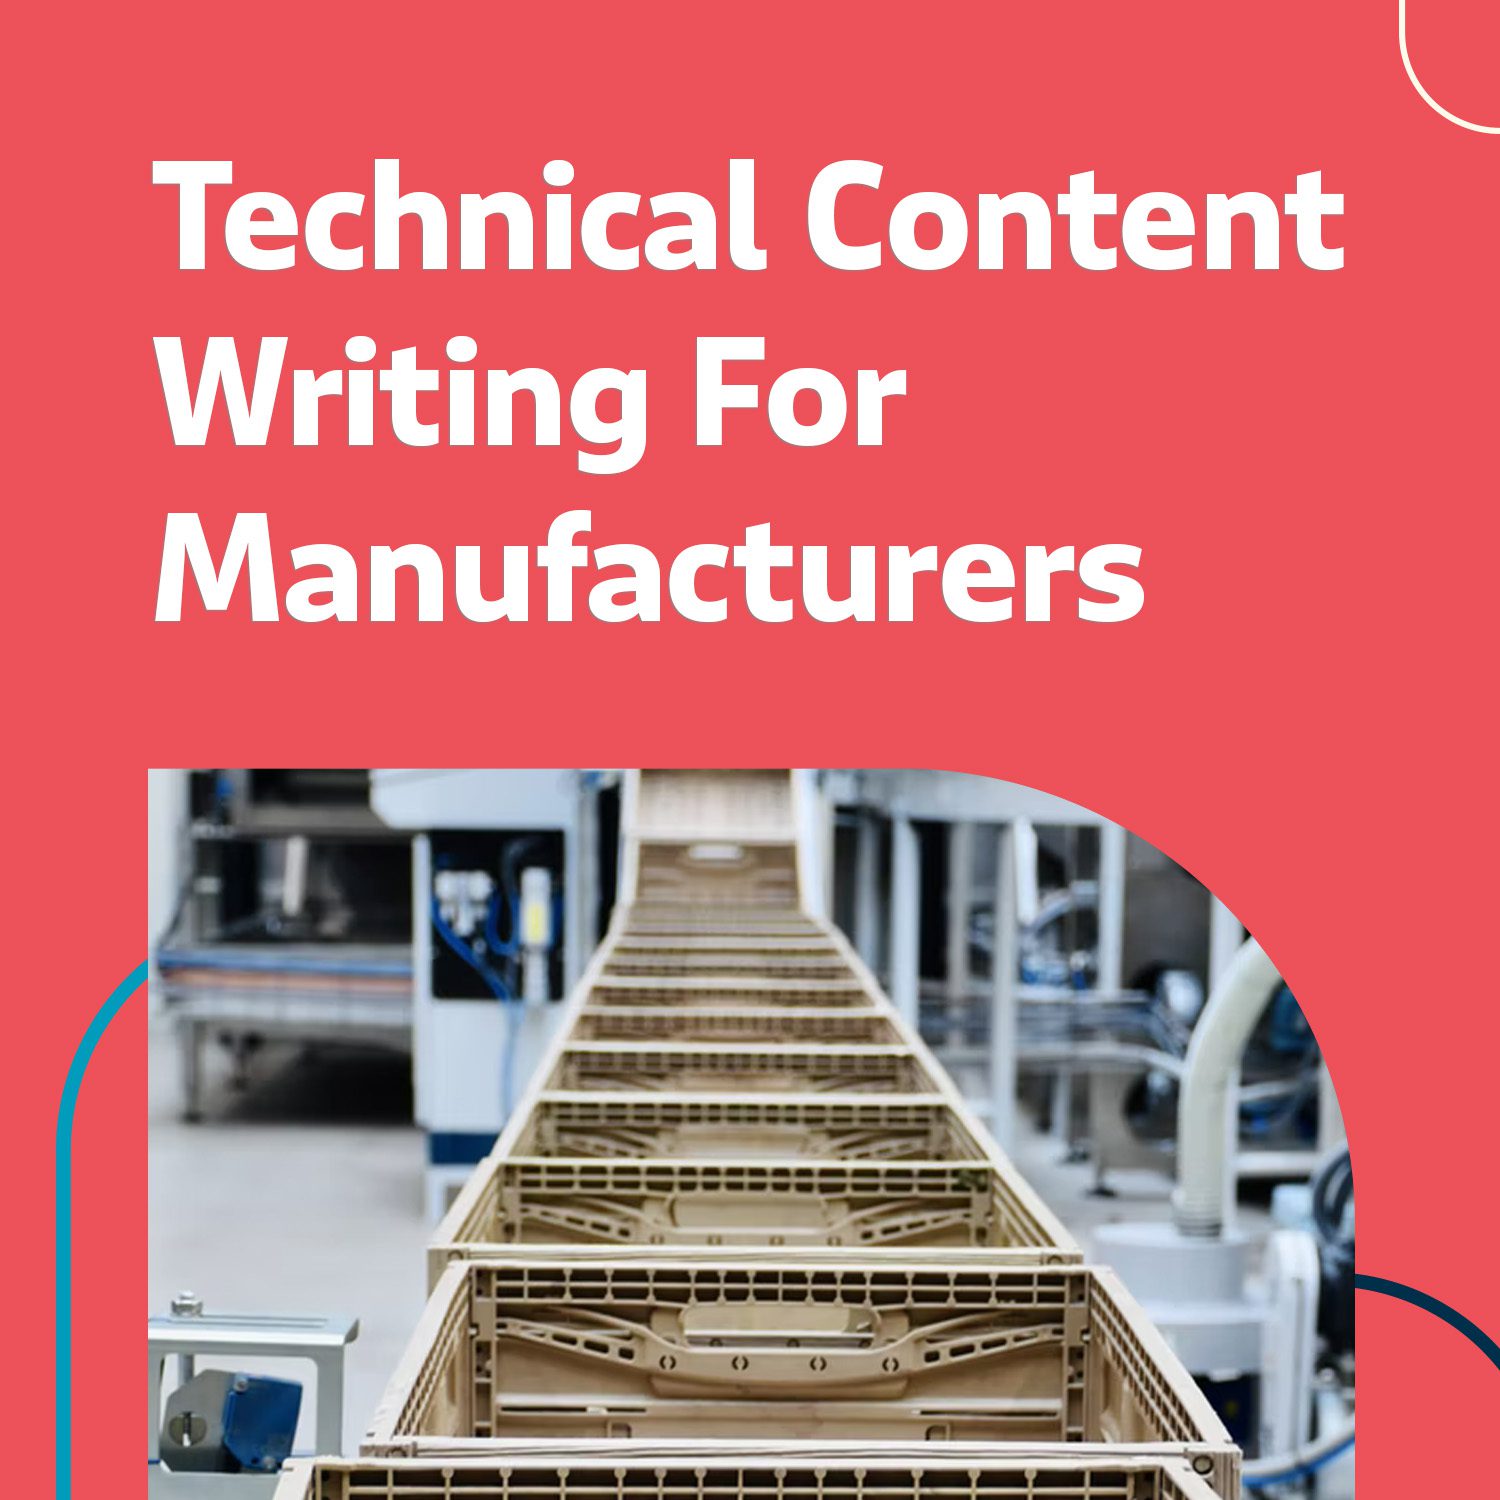 Technical Content Writing in Manufacturing